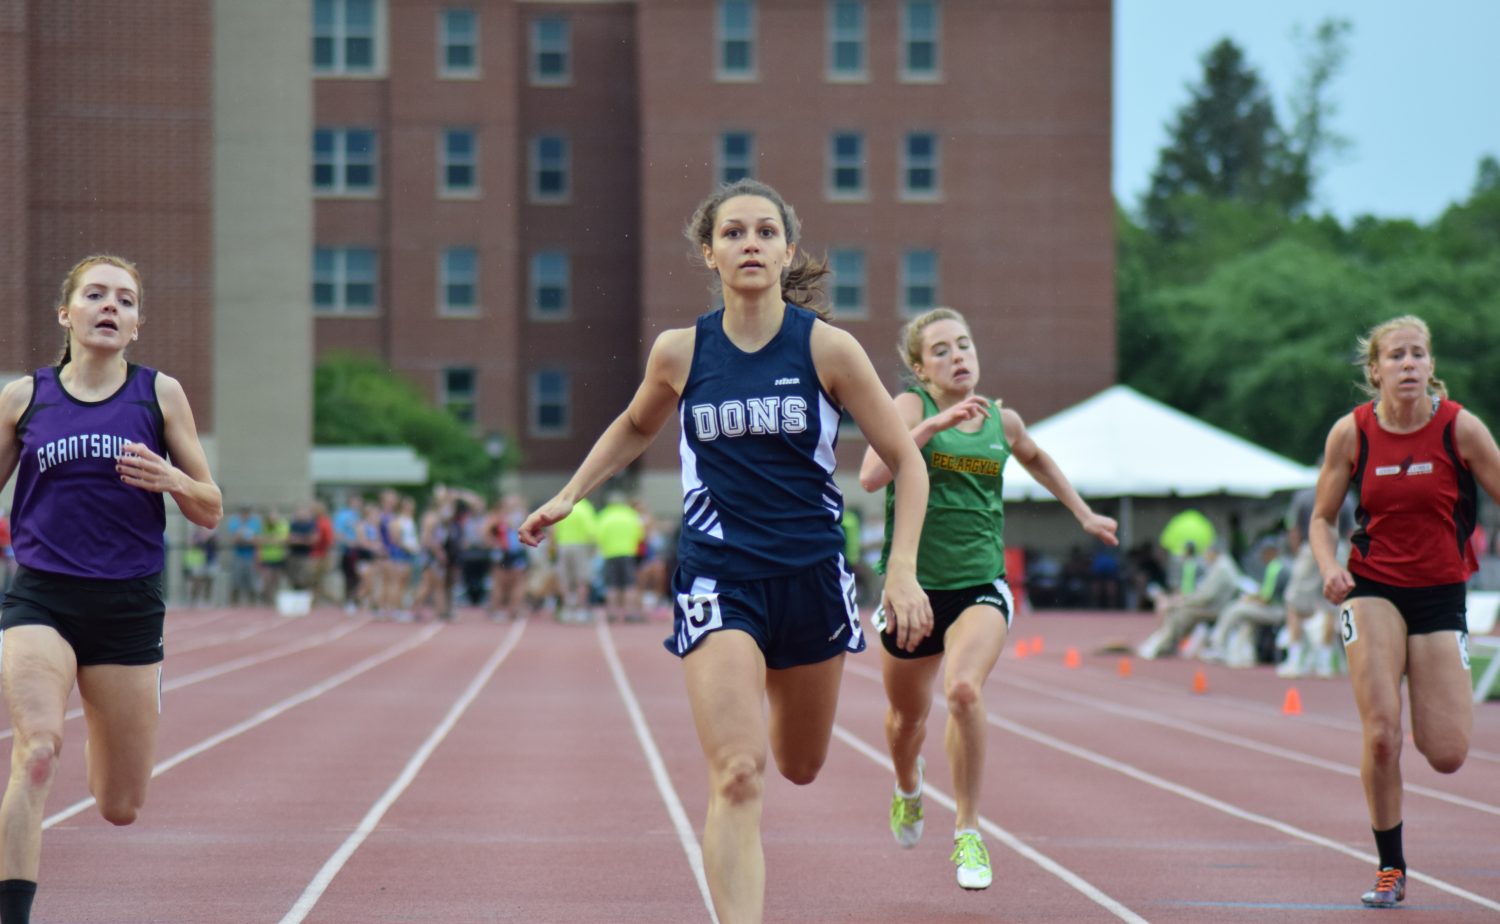 Marshfield Columbus Catholic’s Alexandra Hutchison wins the 200-meter dash at the 2016 WIAA State Track & Field Championships at the University of Wisconsin-La Crosse on Friday. She had the top time in preliminaries (25.17) to qualify for Saturday’s final.